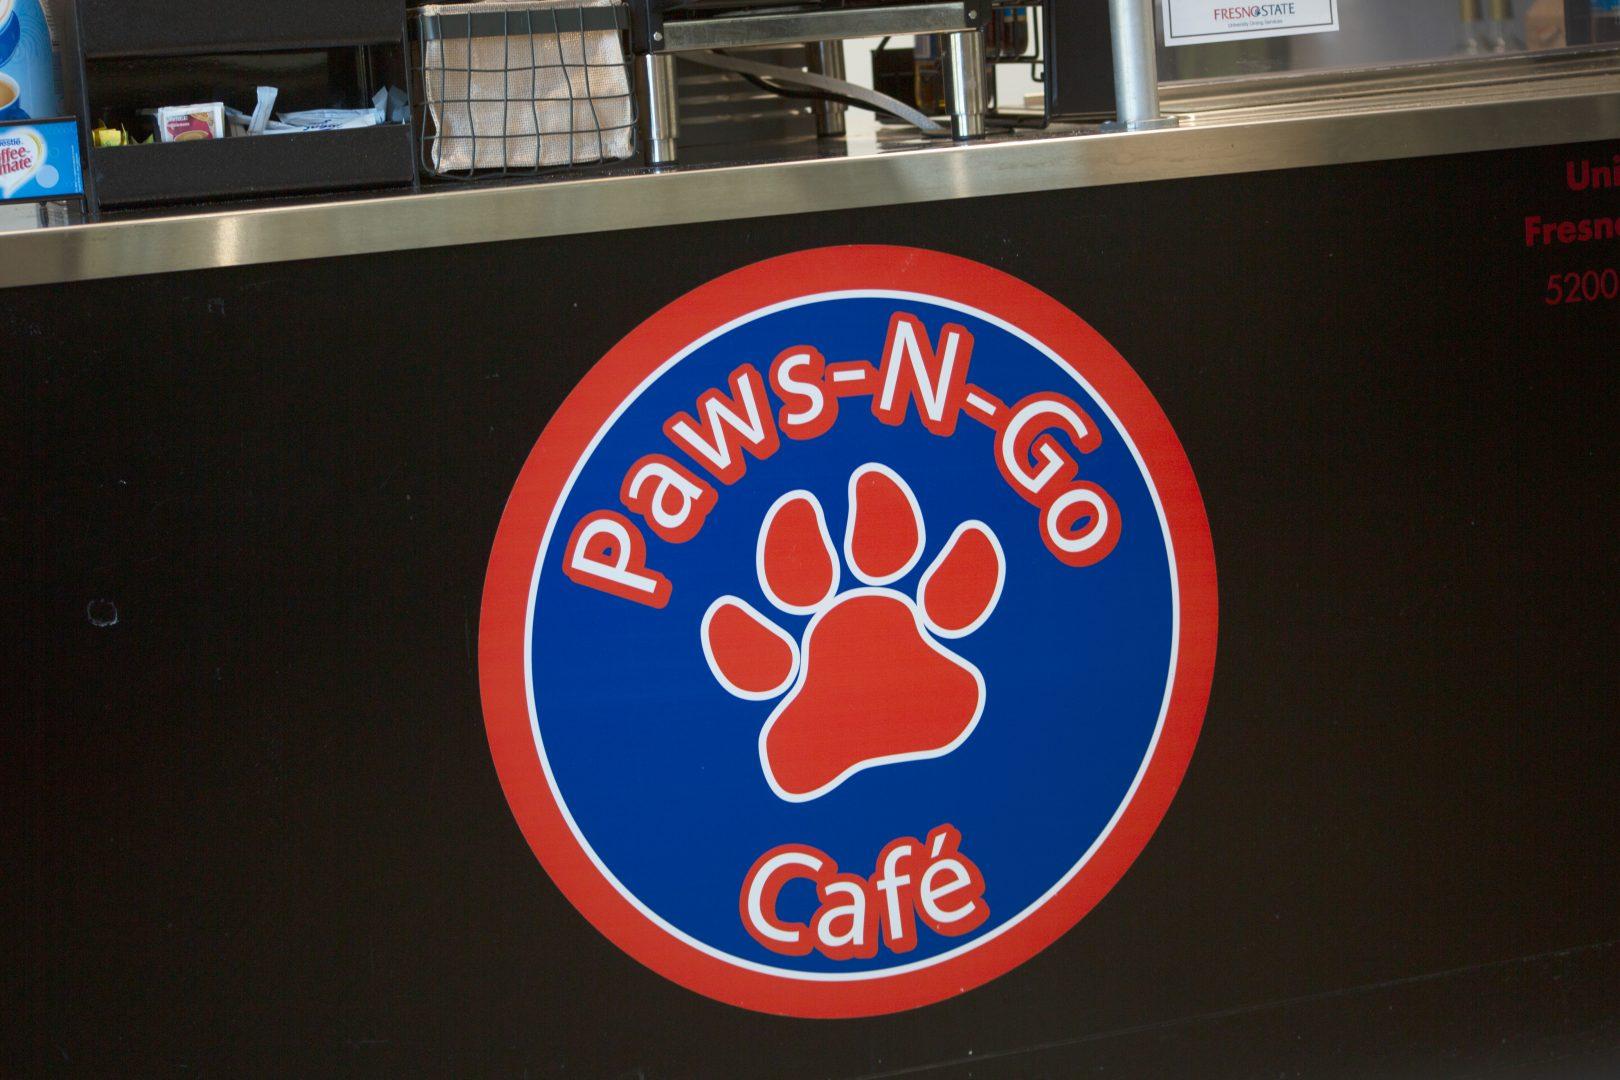 Fresno States fourth Paws-N-Go is located in the north entrance of the Resnick Student Union on the first floor. (Manuel Hernandez/The Collegian)